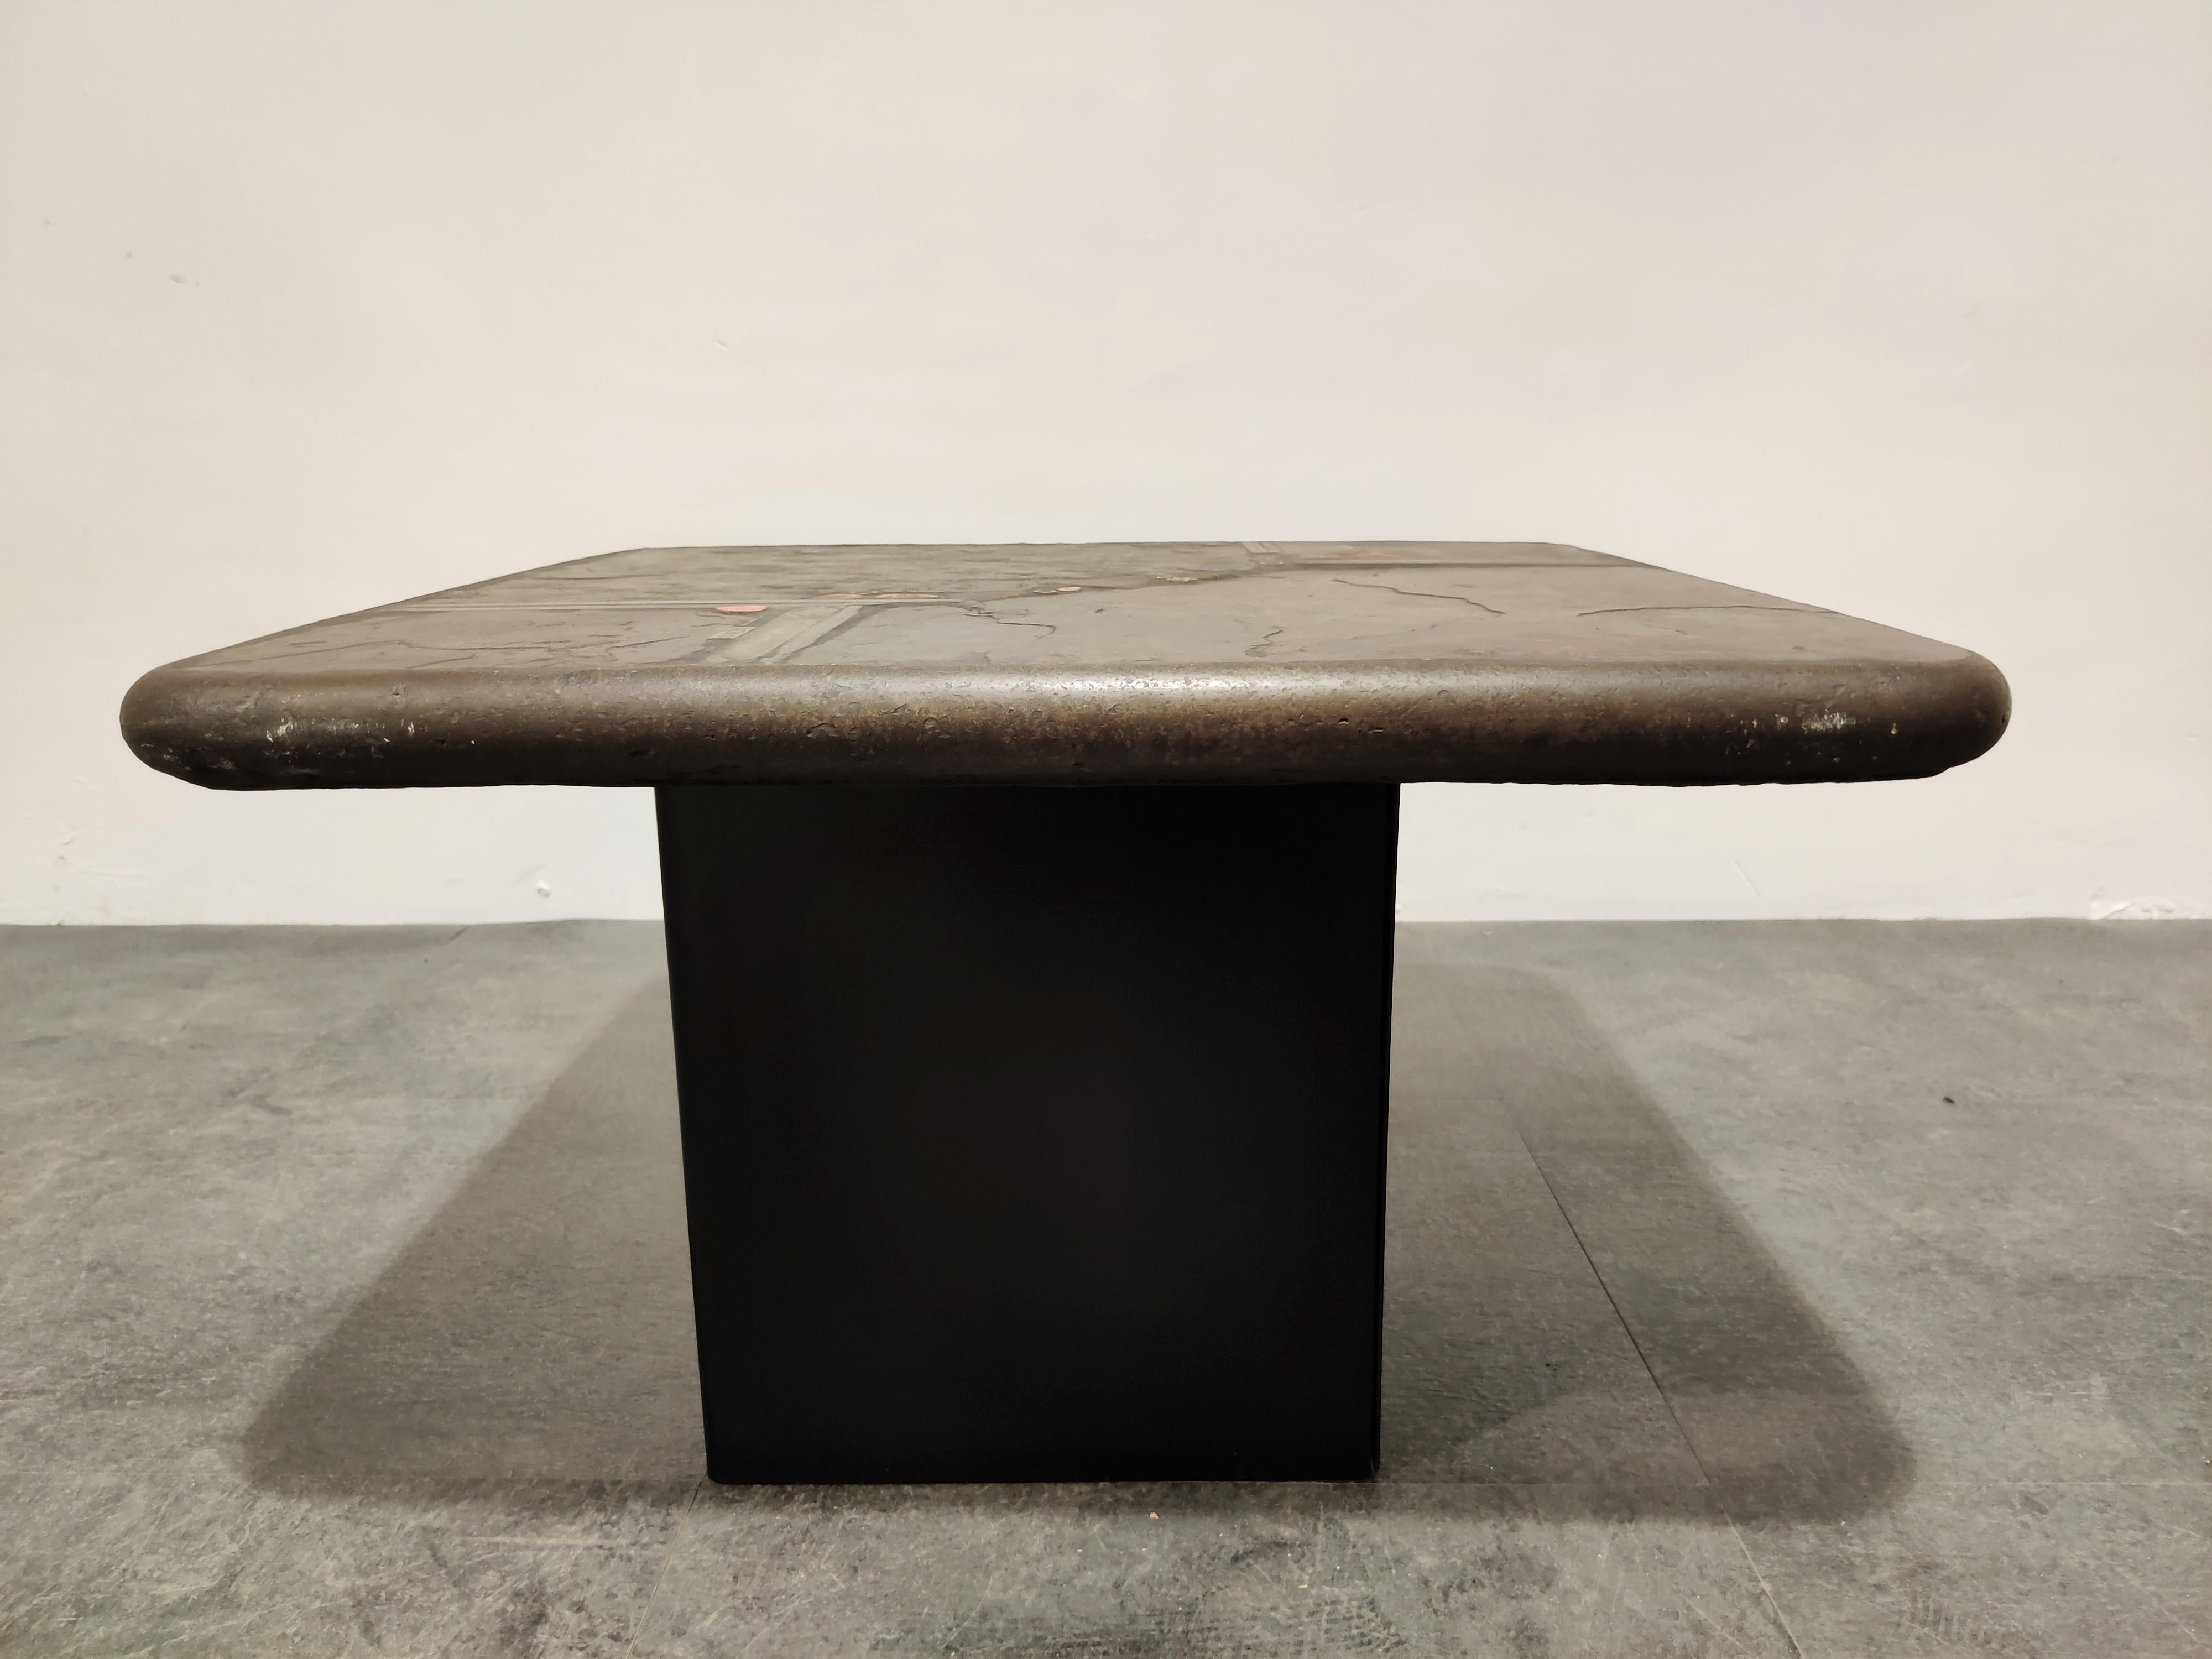 Brutalist slate and natural stone top coffee table with inlaid copper and brass.

The base consists of two L shaped heavy steel bases.

Good condition.

Signed 'Kingma 87'

1987, the Netherlands

Measures: Height 40cm/15.74